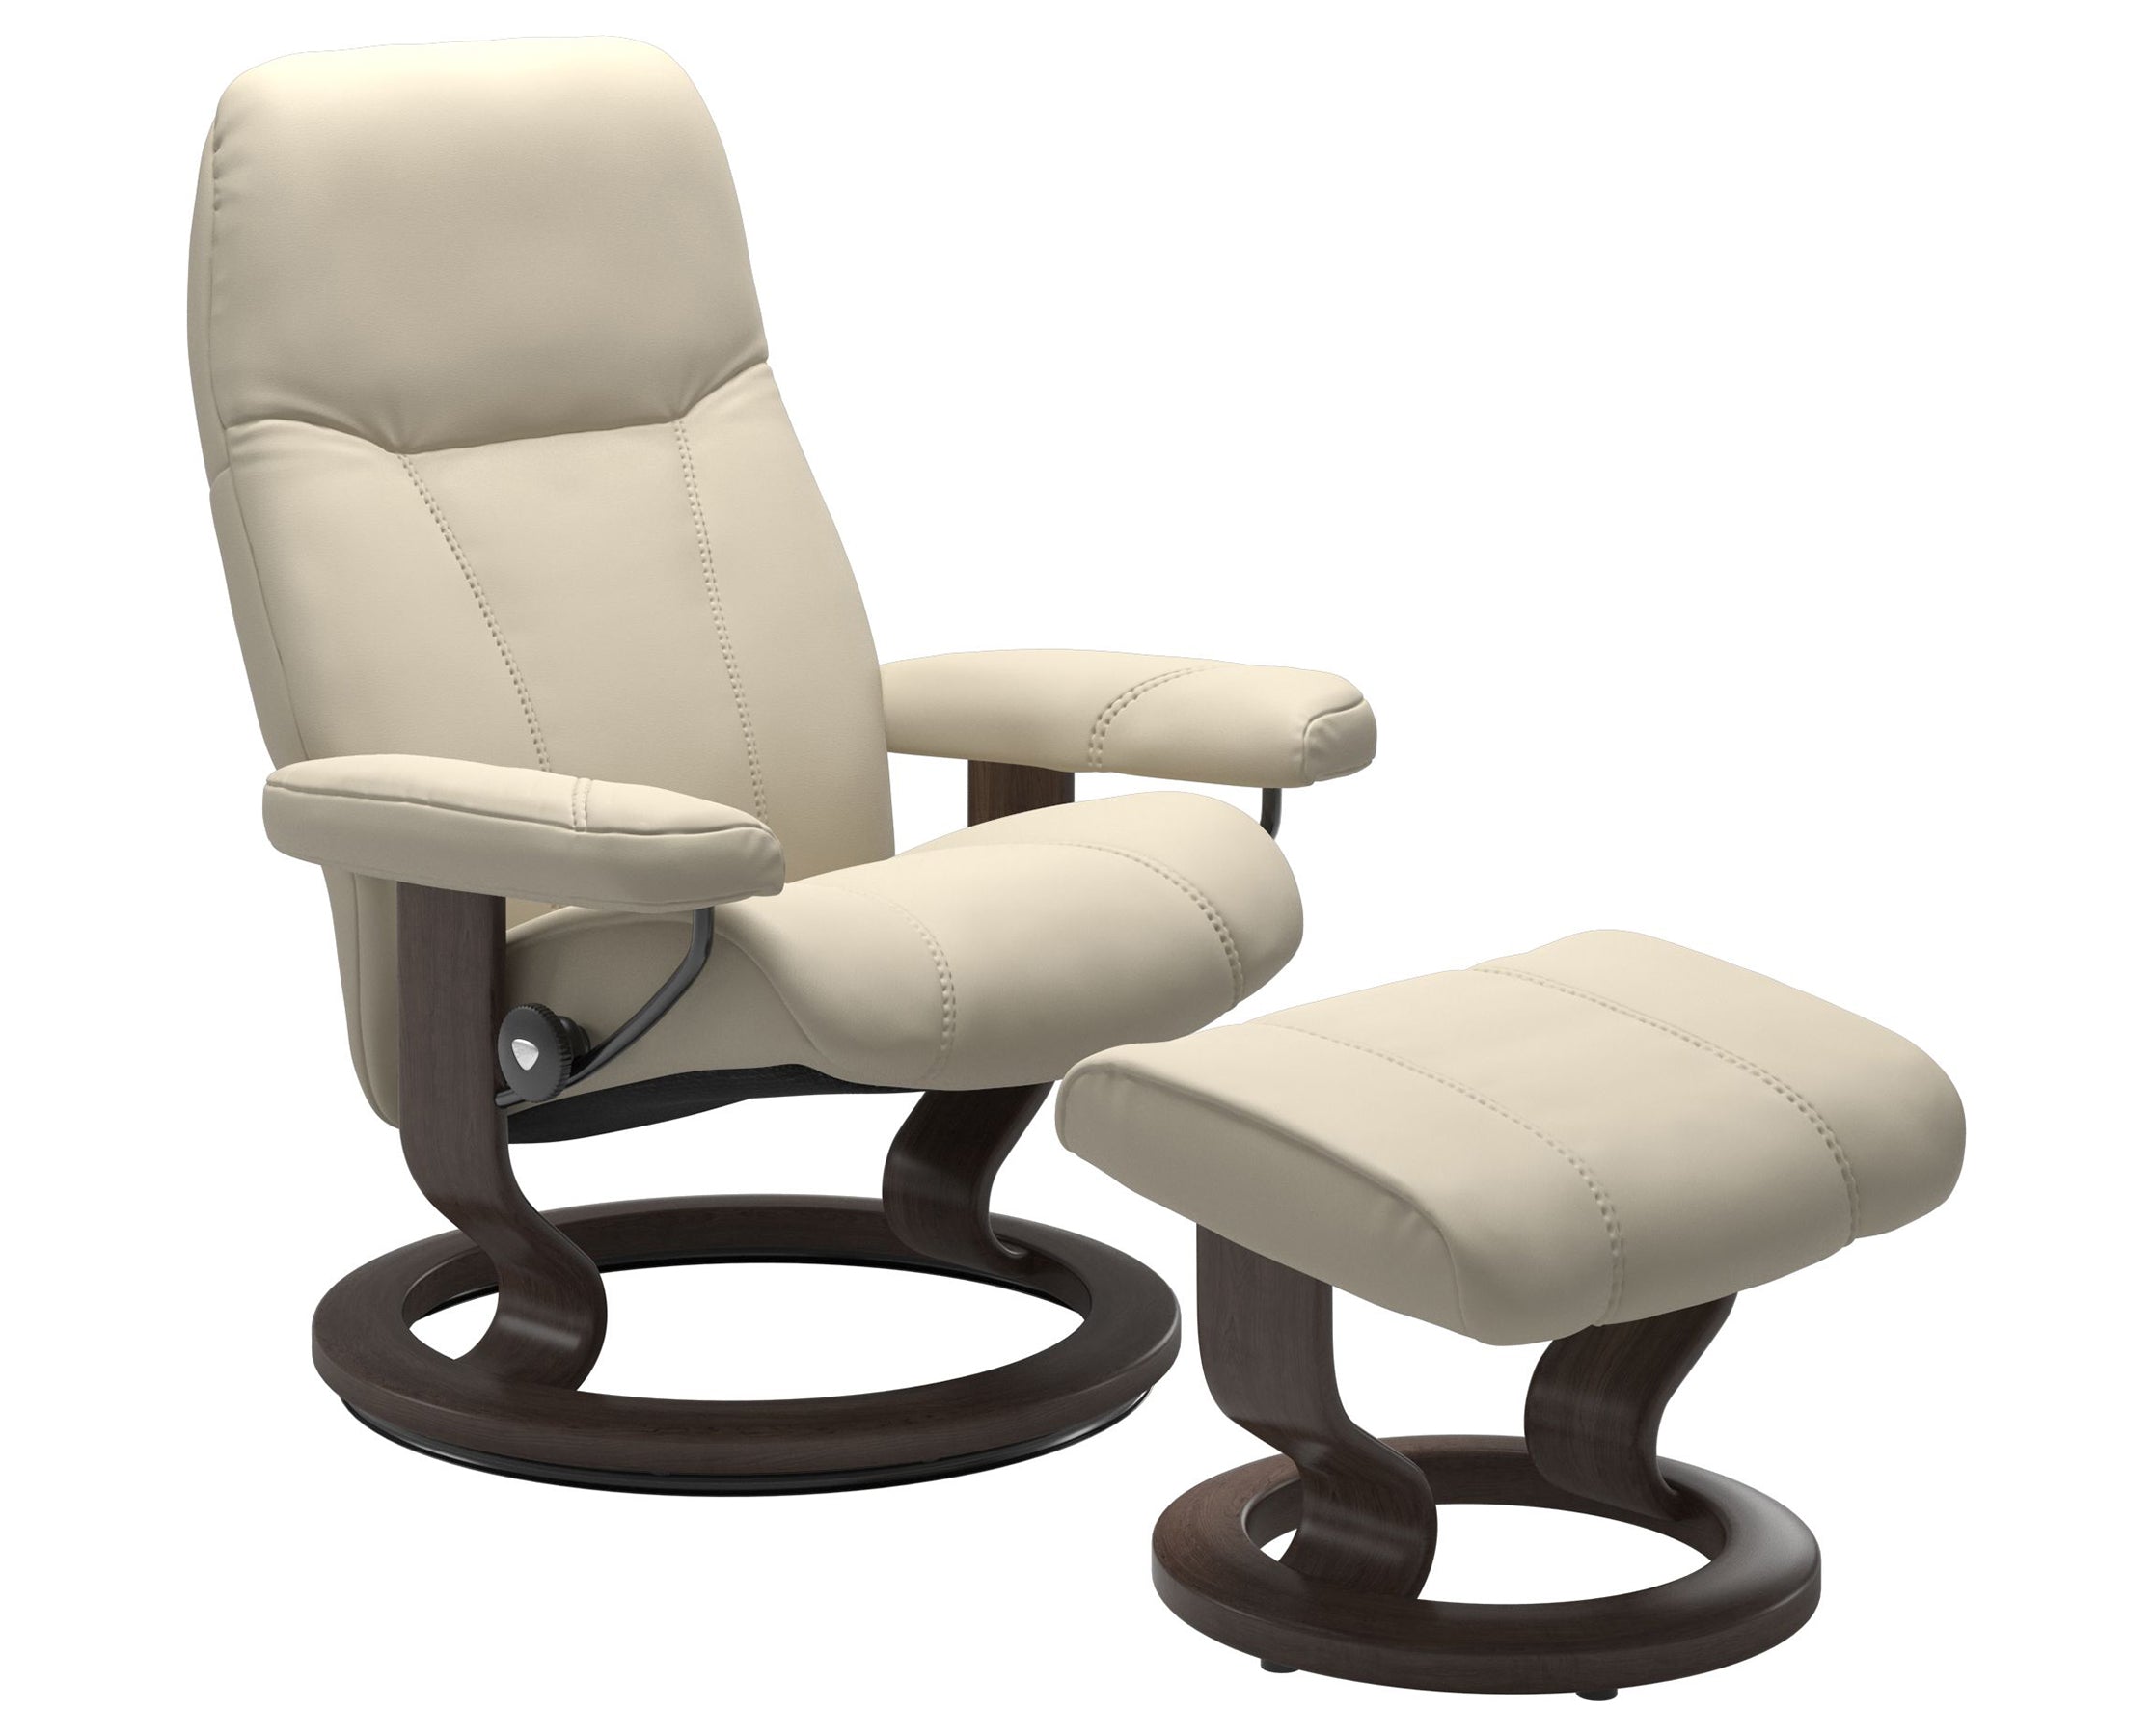 Batick Leather Cream S/M/L and Wenge Base | Stressless Consul Classic Recliner | Valley Ridge Furniture